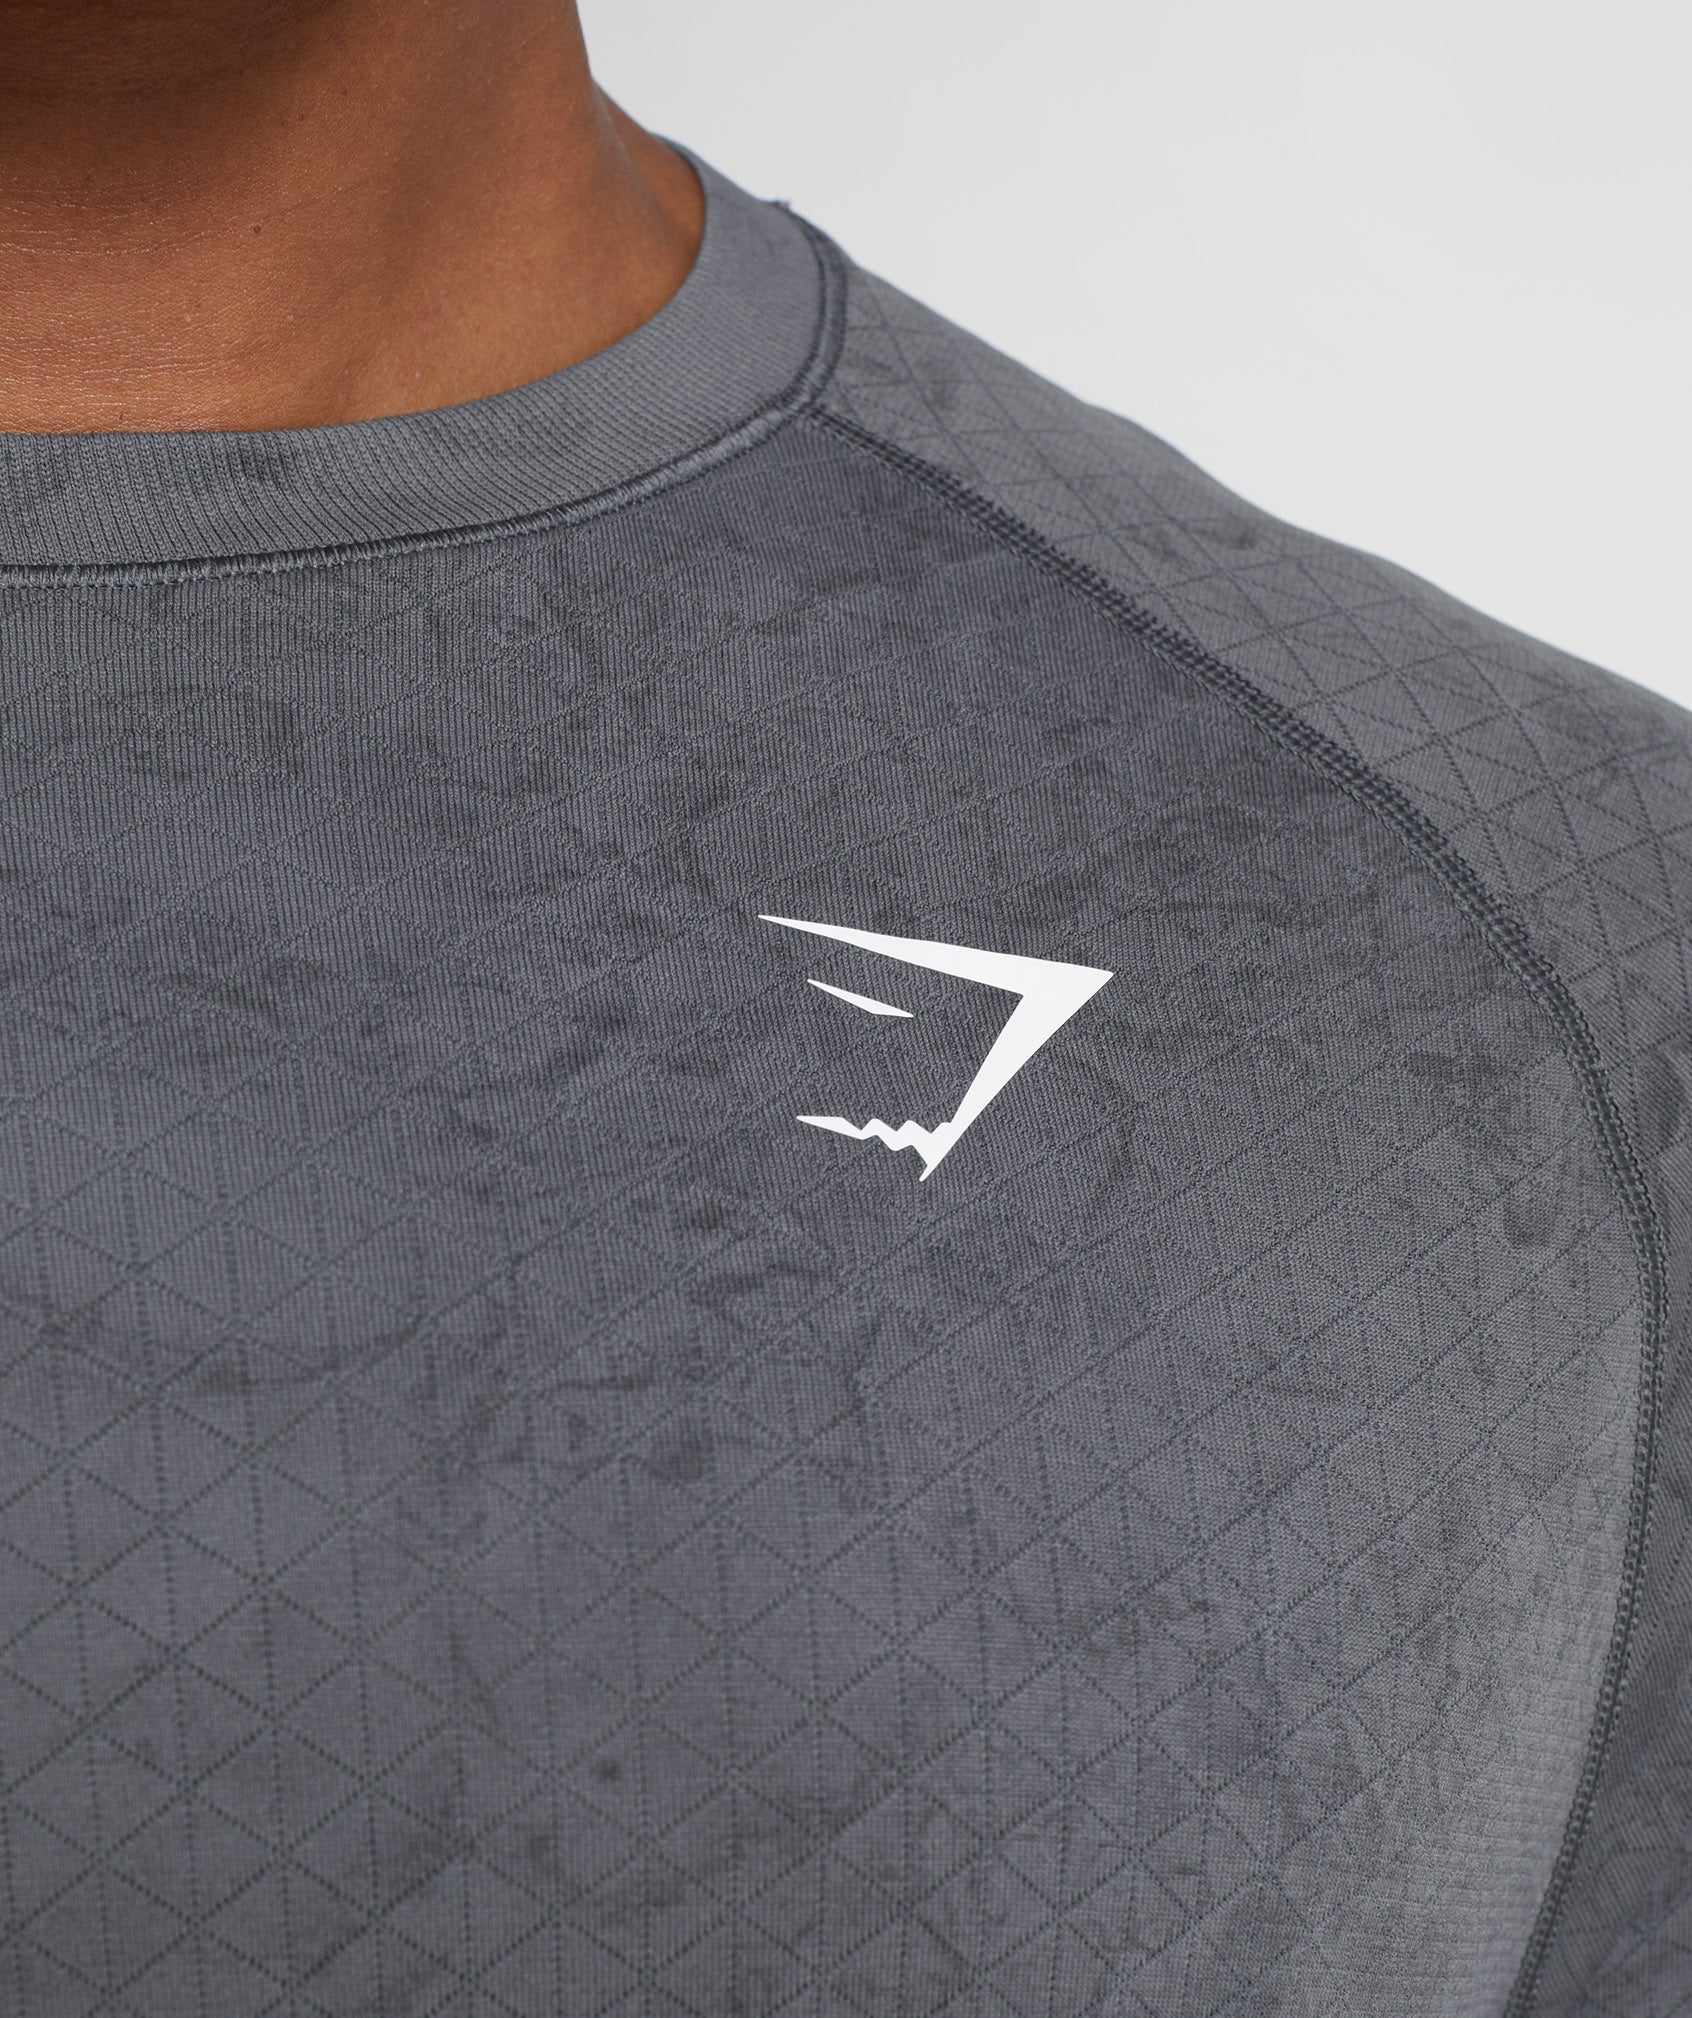 Geo Seamless Long Sleeve T-Shirt in Charcoal Grey/Black - view 6